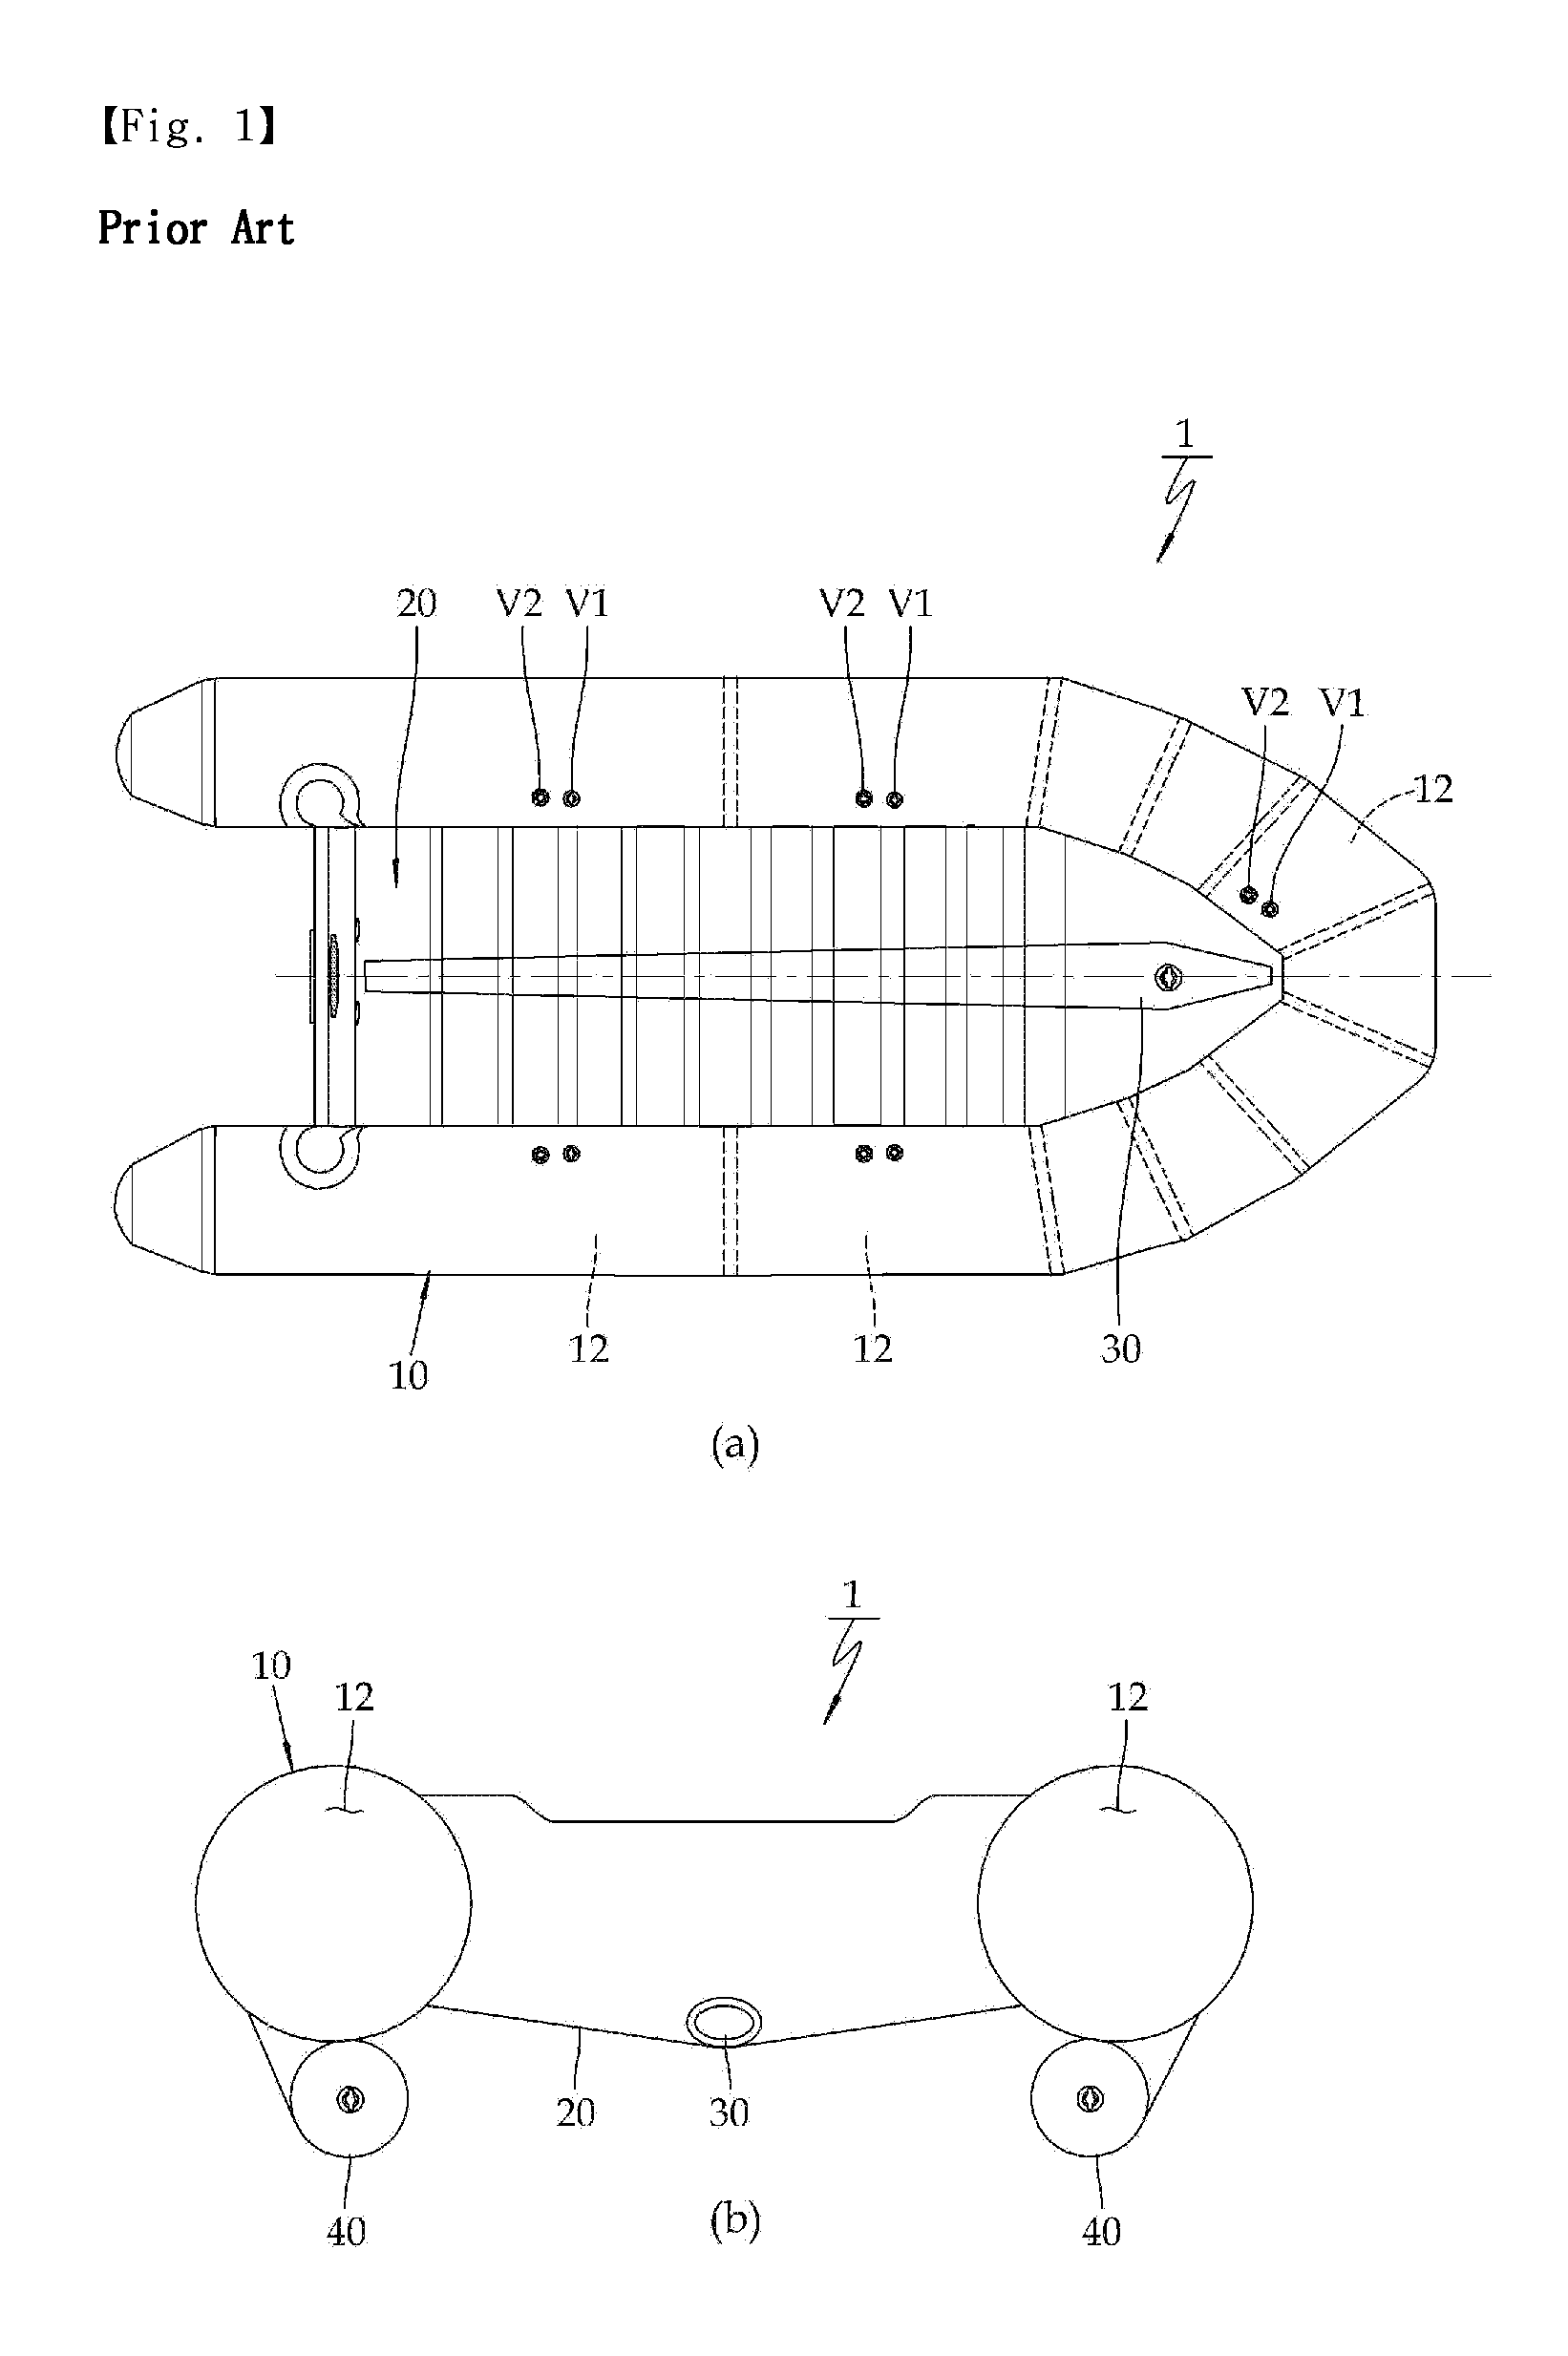 Inflatable boat having self-inflation system